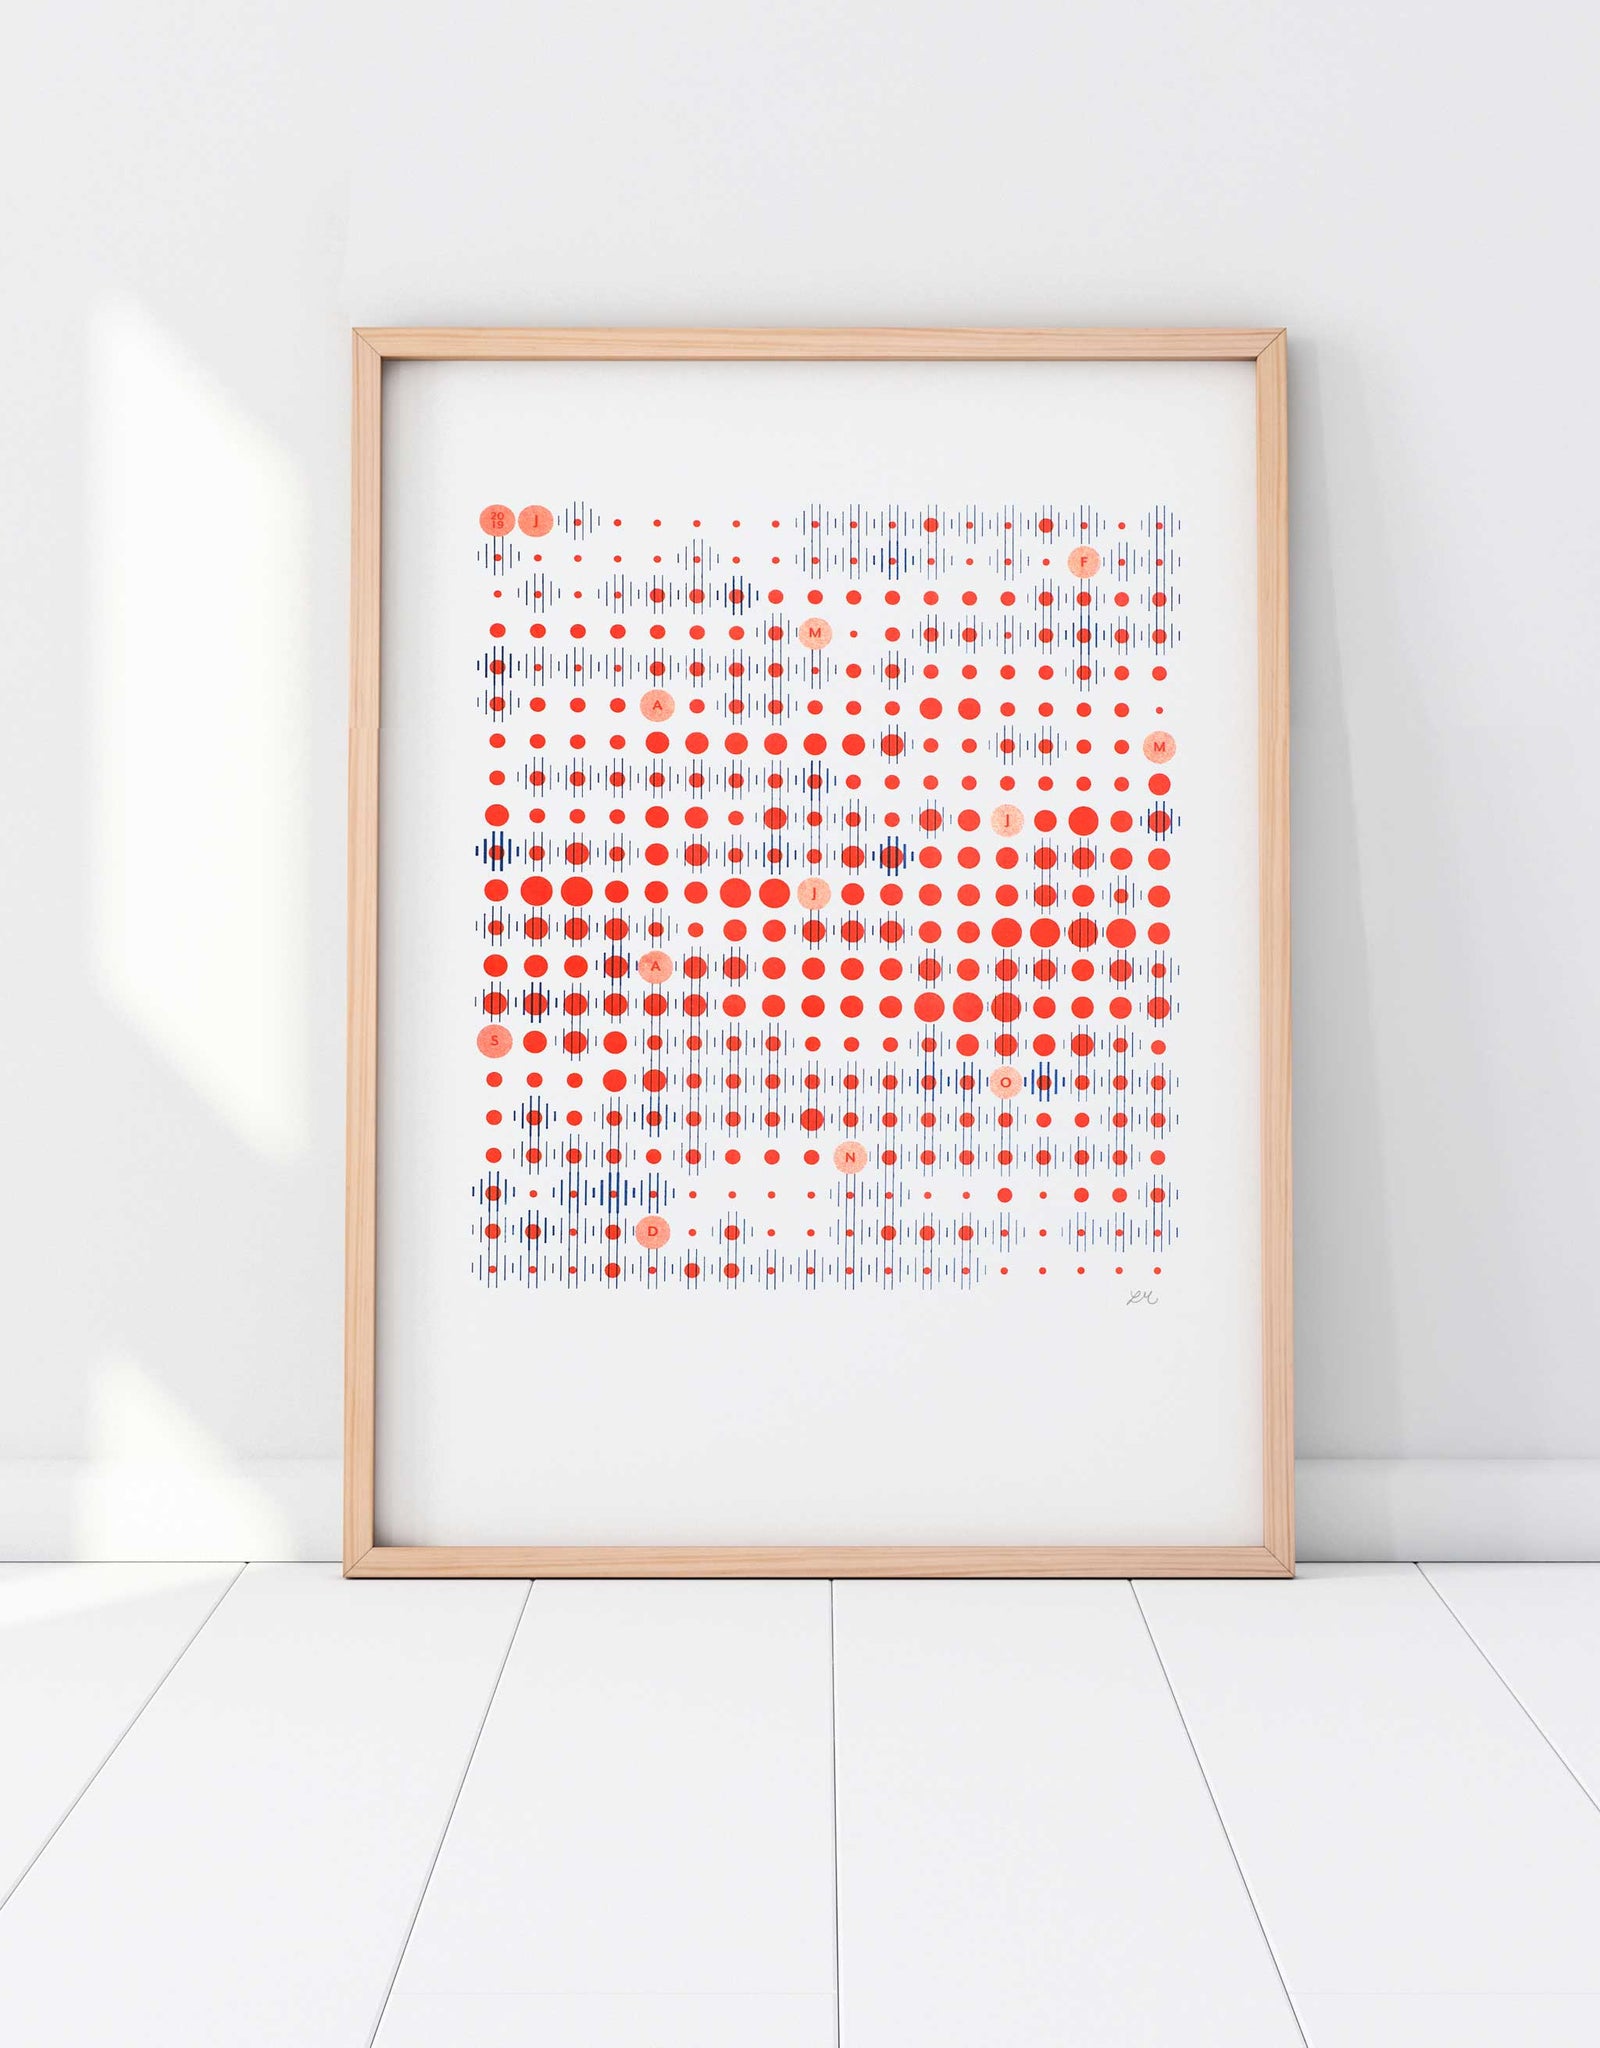 Framed A3 riso data print poster of Amsterdam weather in blue and red grid pattern